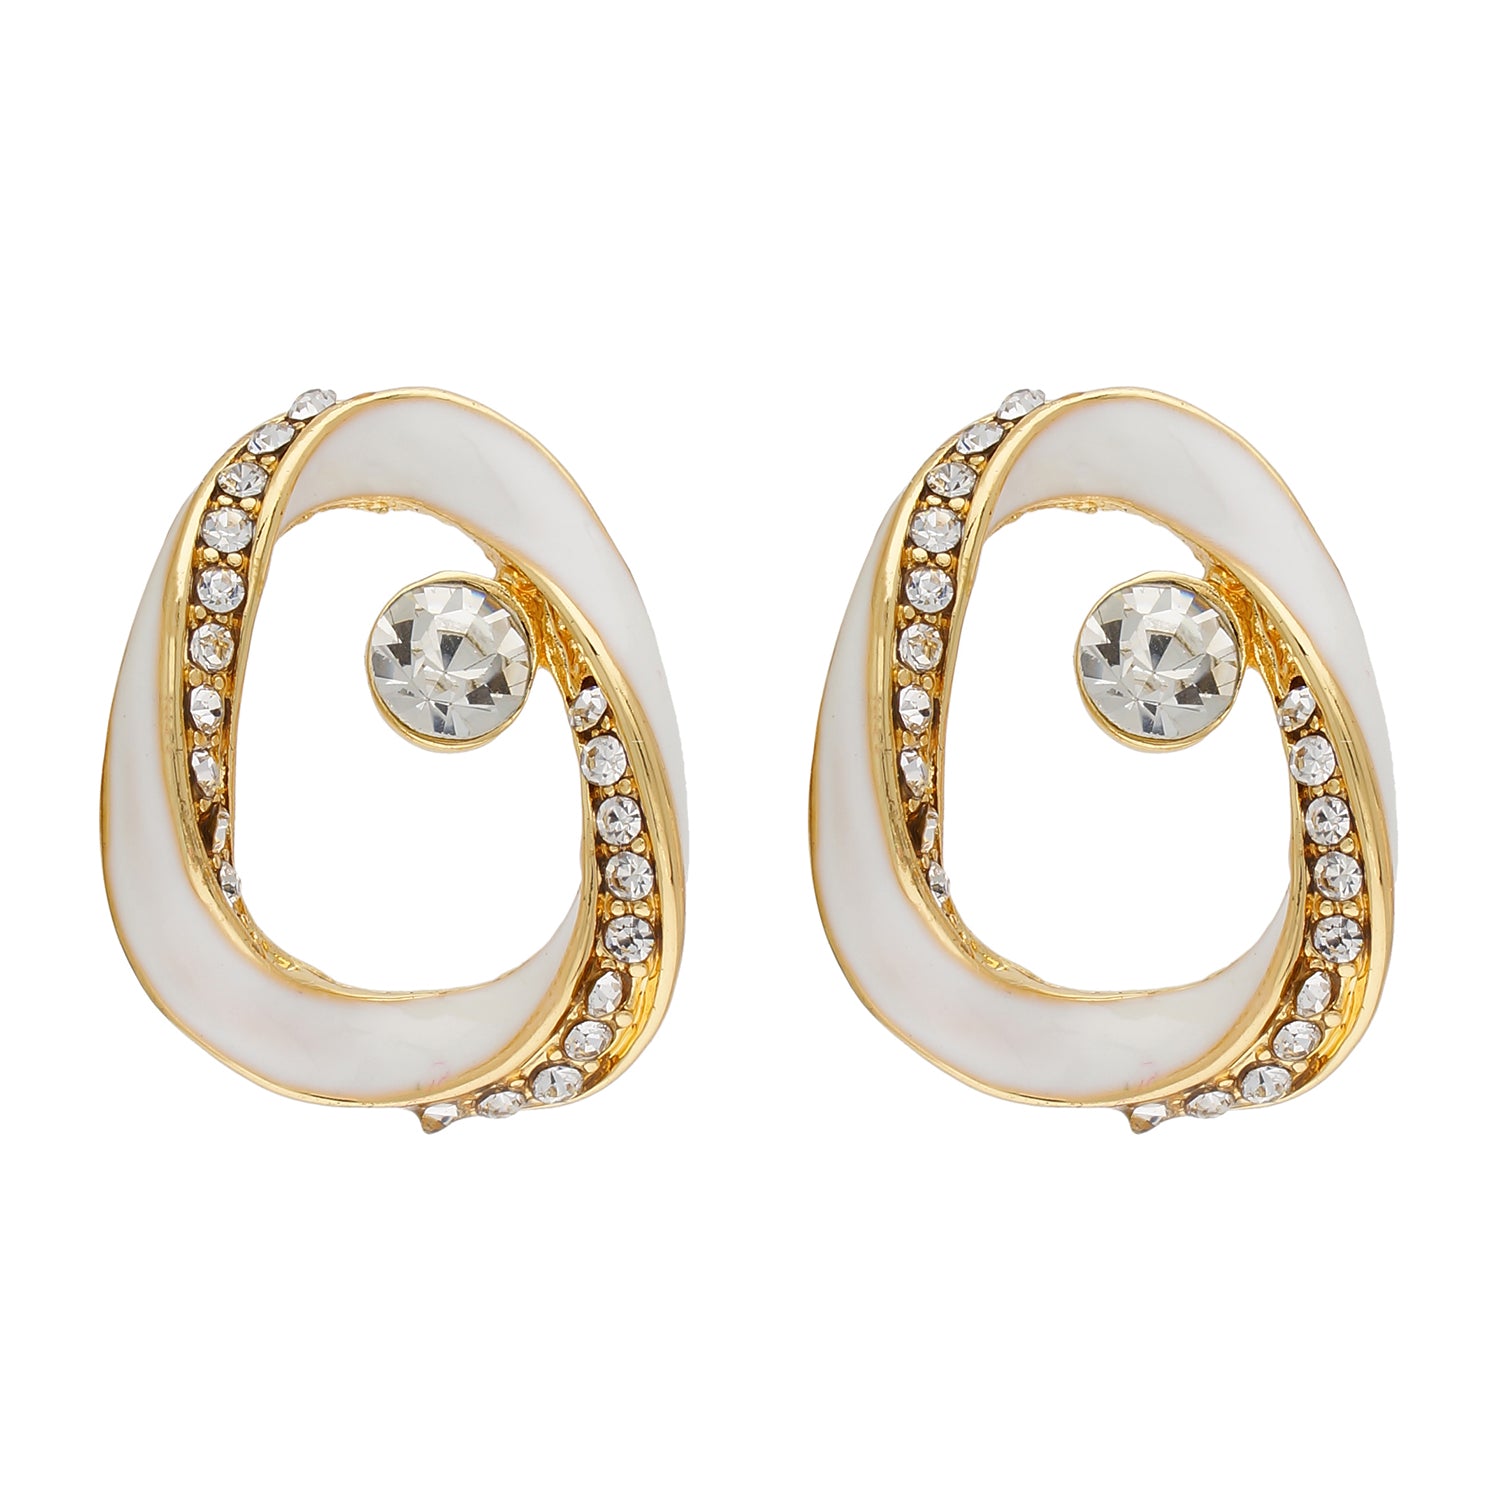 Contemporary White and Gold Colour Oval Design Enamel Enhanced Earring for Girls and Women